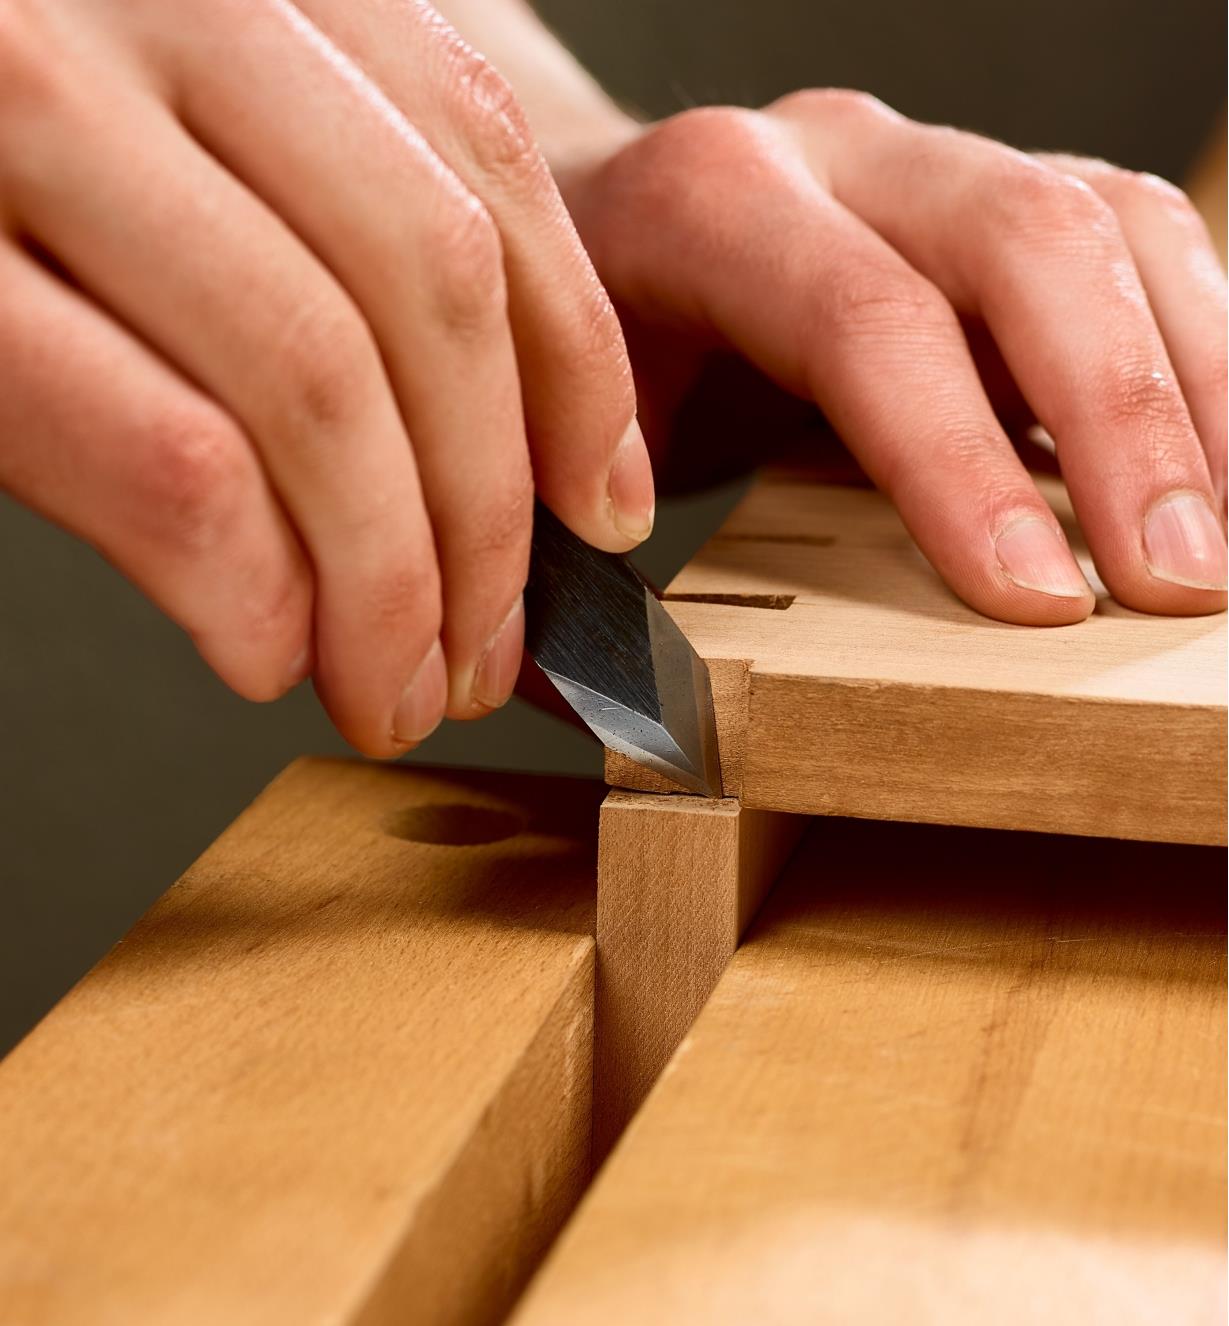 Scribing dovetails using the Japanese spear-point marking knife